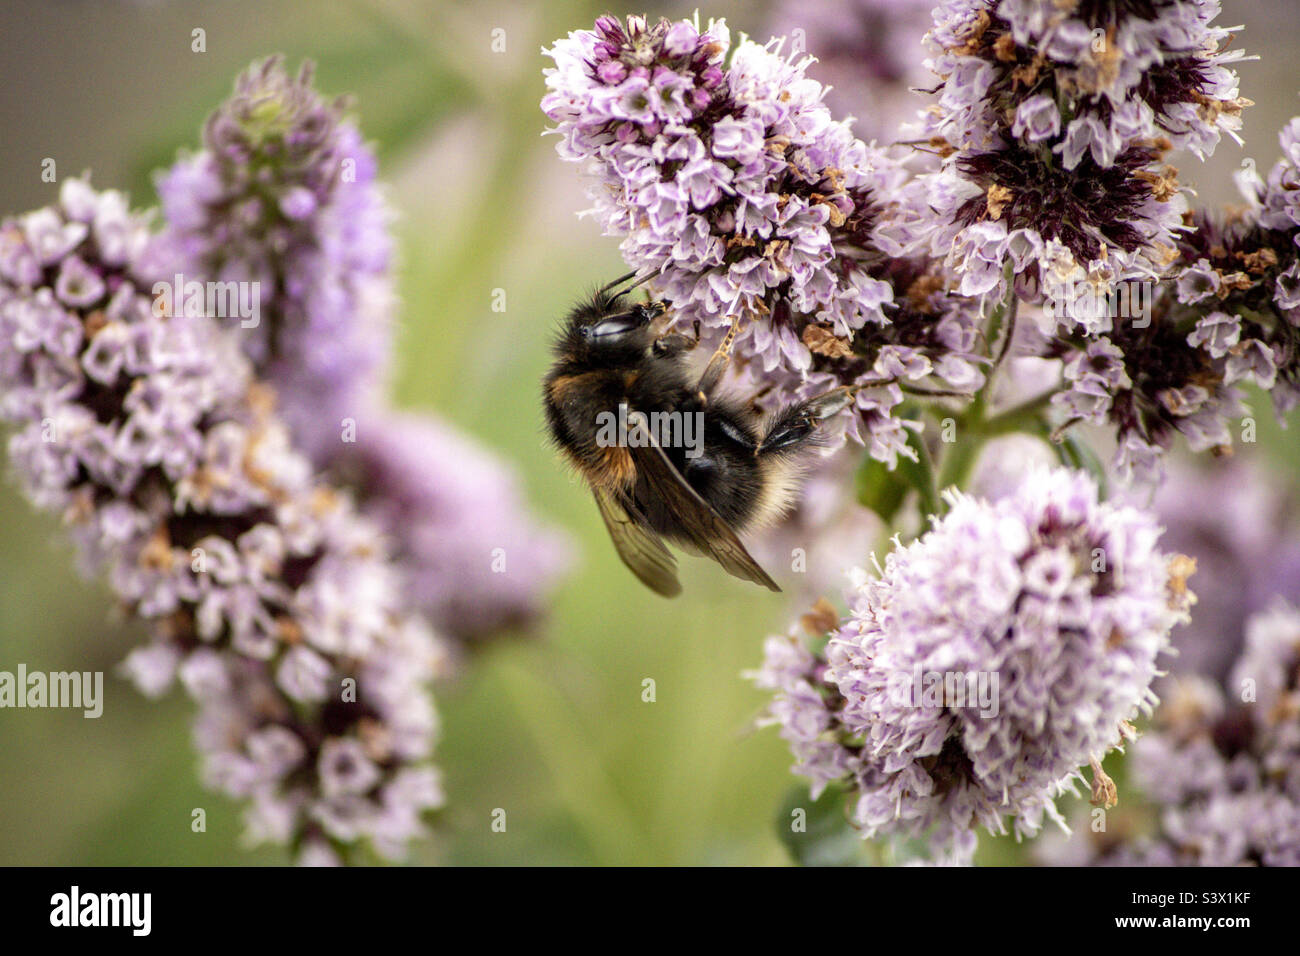 A bumblebee getting the nectar from the flowers Stock Photo